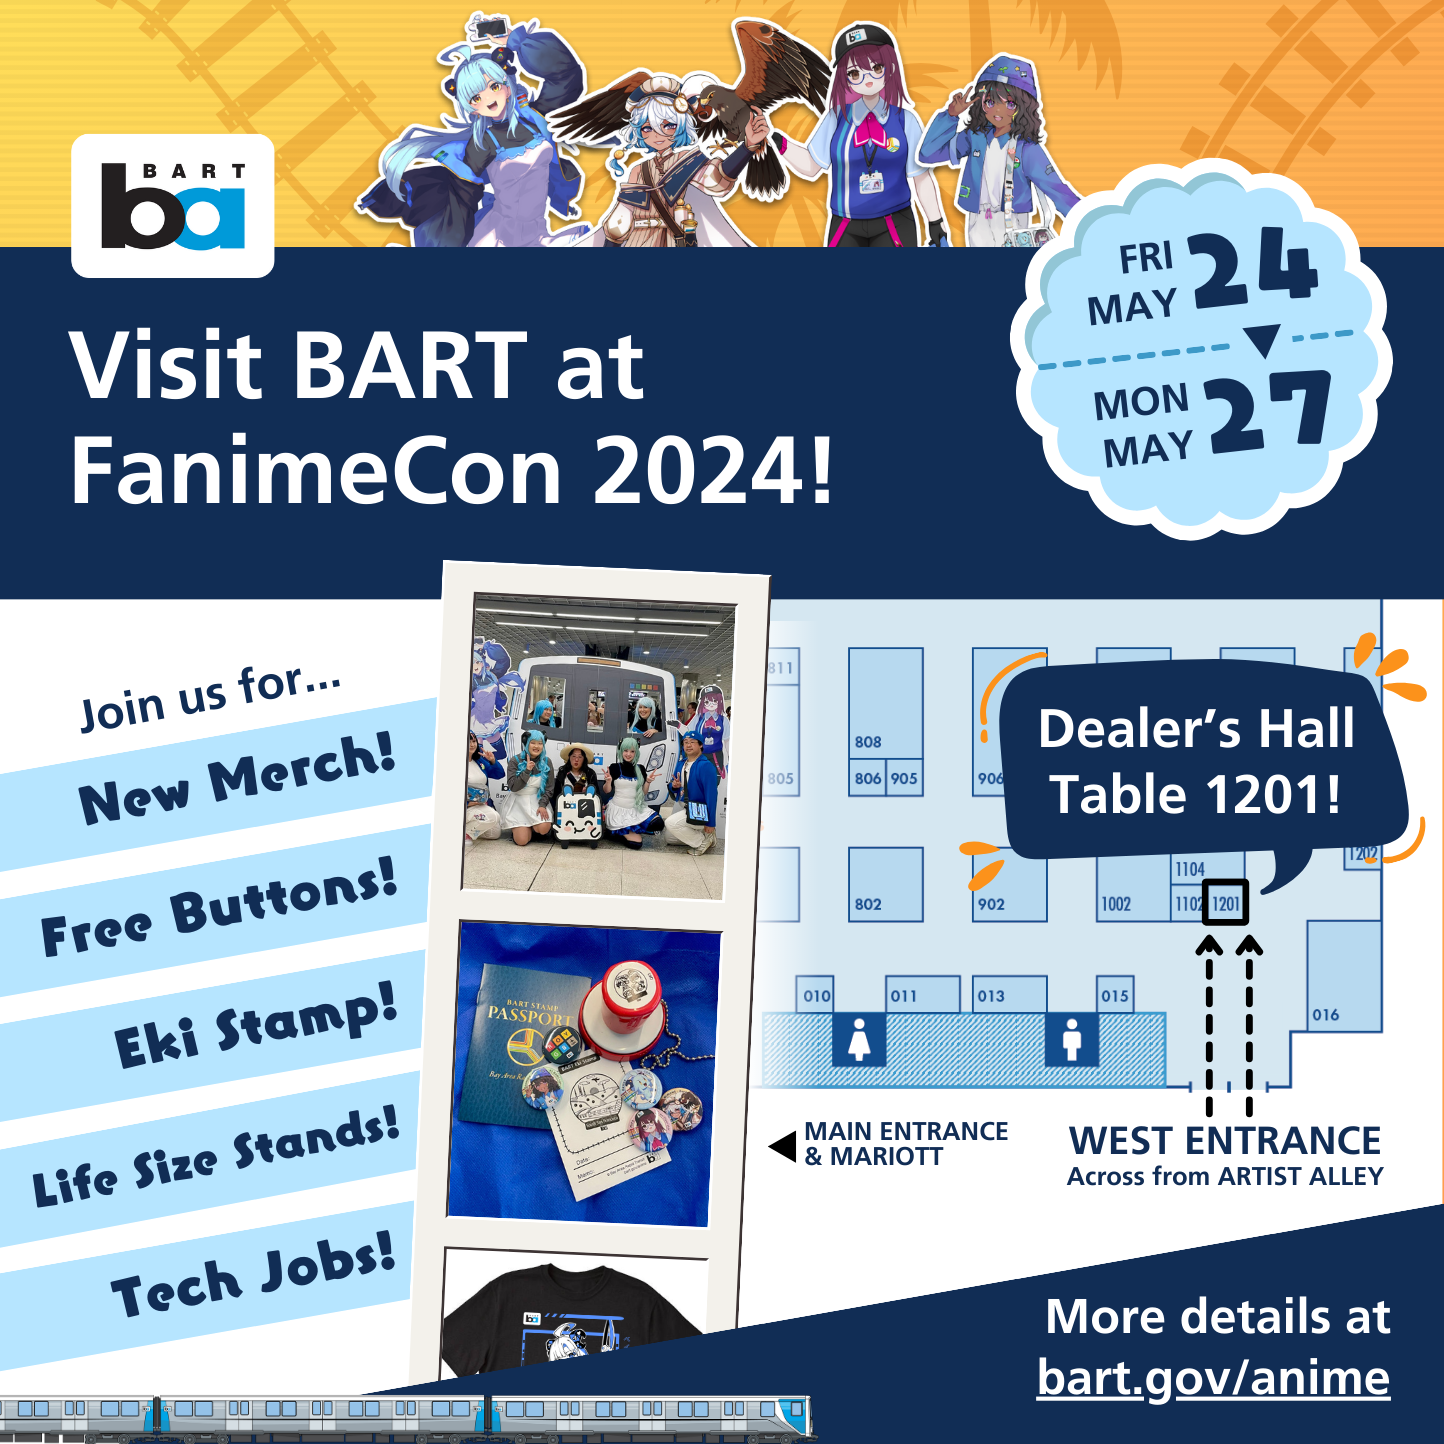 Visit BART at FanimeCon 2024 from Friday, May 24, to Monday, May 27, 2024. Join us for new merch, free buttons, eki stamps, life size stands, tech jobs, and more! BART is located at Dealer's Hall Table 1201, directly in front of the west entrance, which is across from Artist Alley. More details at bart.gov/anime. At the top of this graphic, you can find an illustration of our Anime Mascots. In the center of this graphic, there is a strip of three photos featuring a group cosplay photo, an eki stamp with buttons, and a sneak peek of a Baylee t-shirt design.